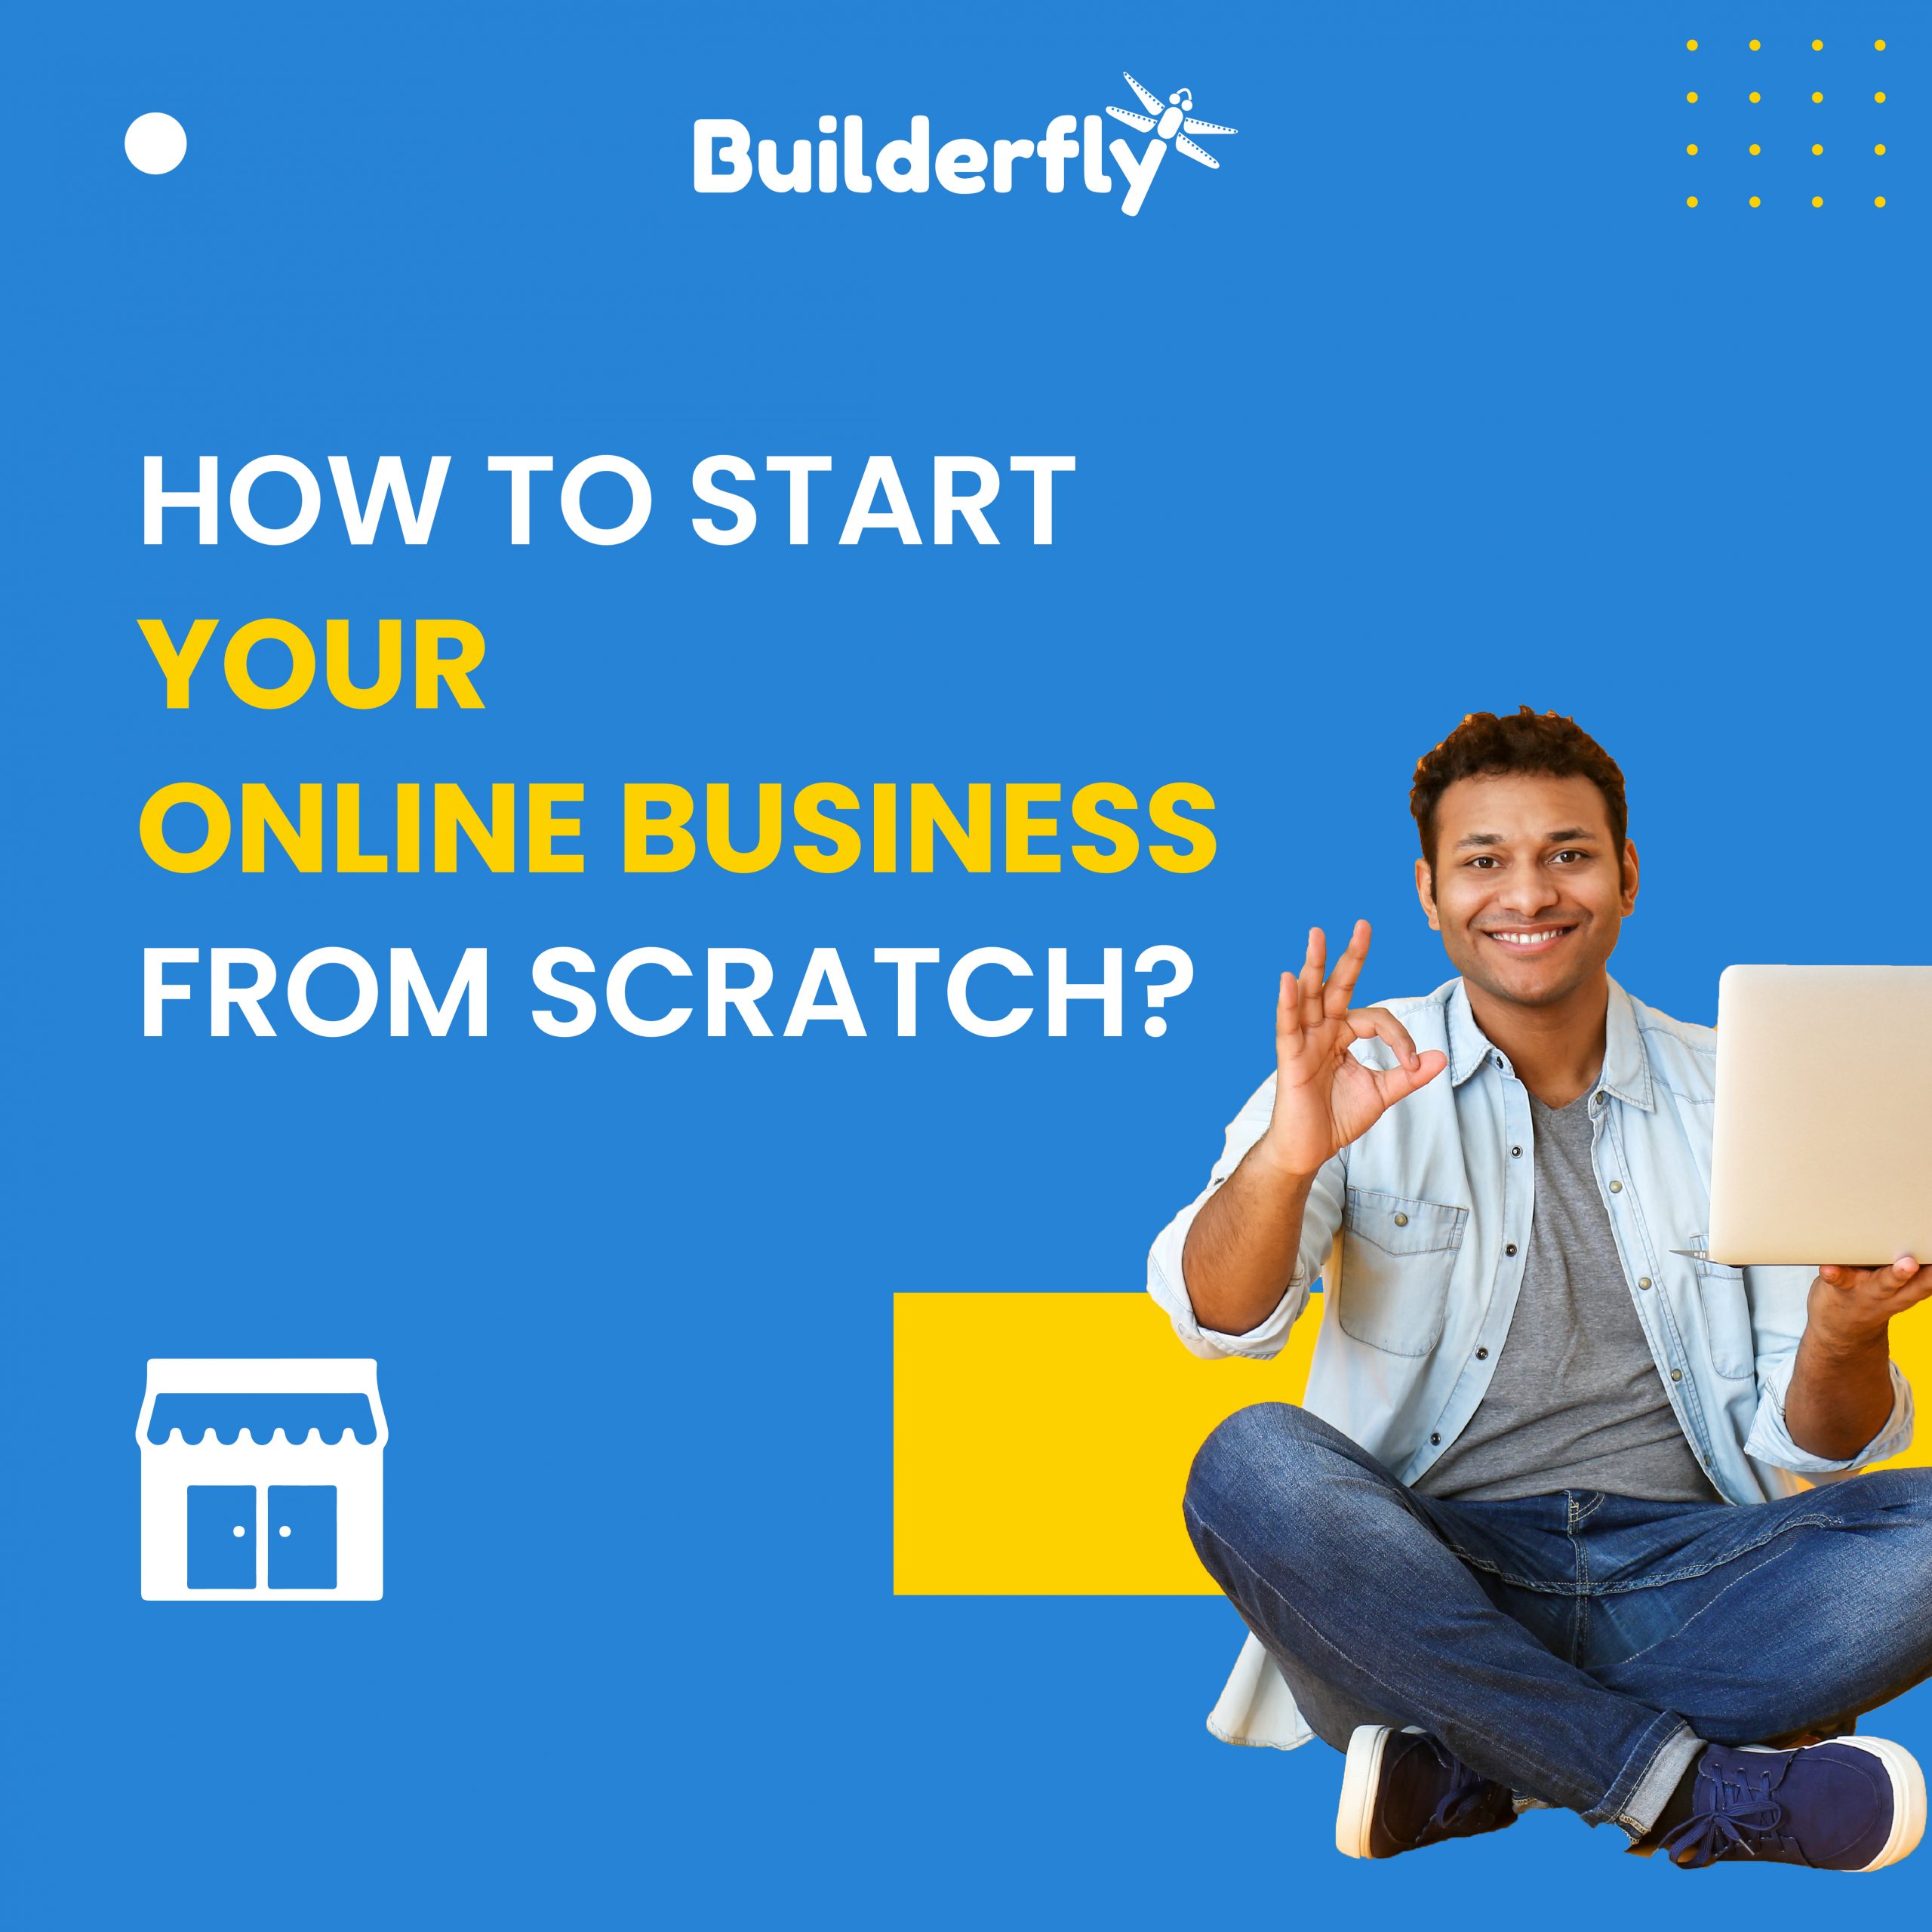 If you want to start your eCommerce journey, start it with Builderfly